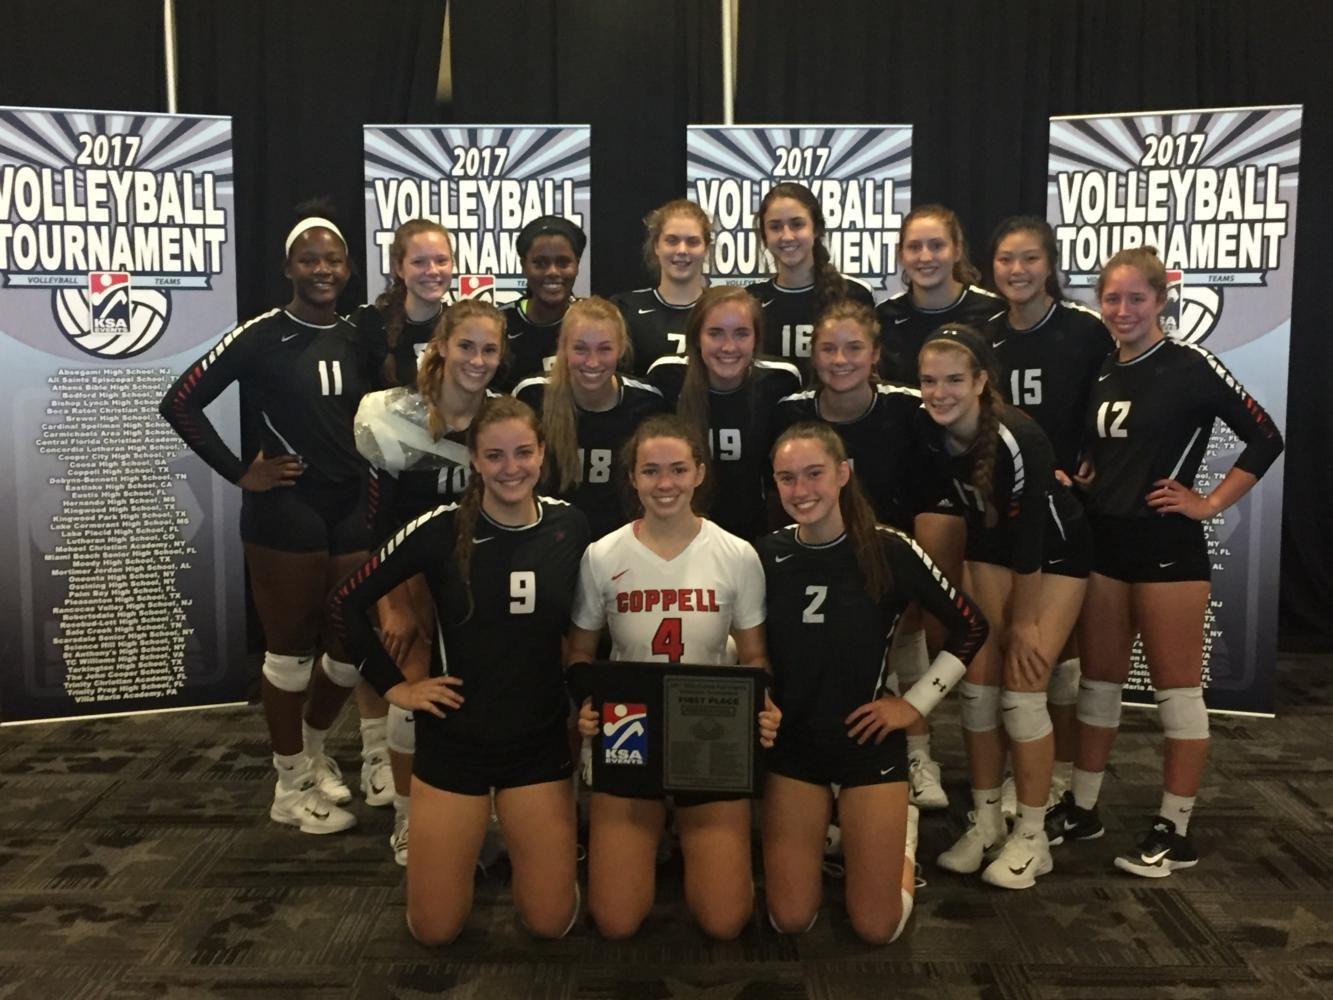 The+Coppell+Cowgirls+varsity+volleyball+team+competed+at+the+KSA+Fall+Classic+Tournament+last+weekend.+They+won+the+overall+tournament+7-0.+Photo+courtesy+Julie+Green+